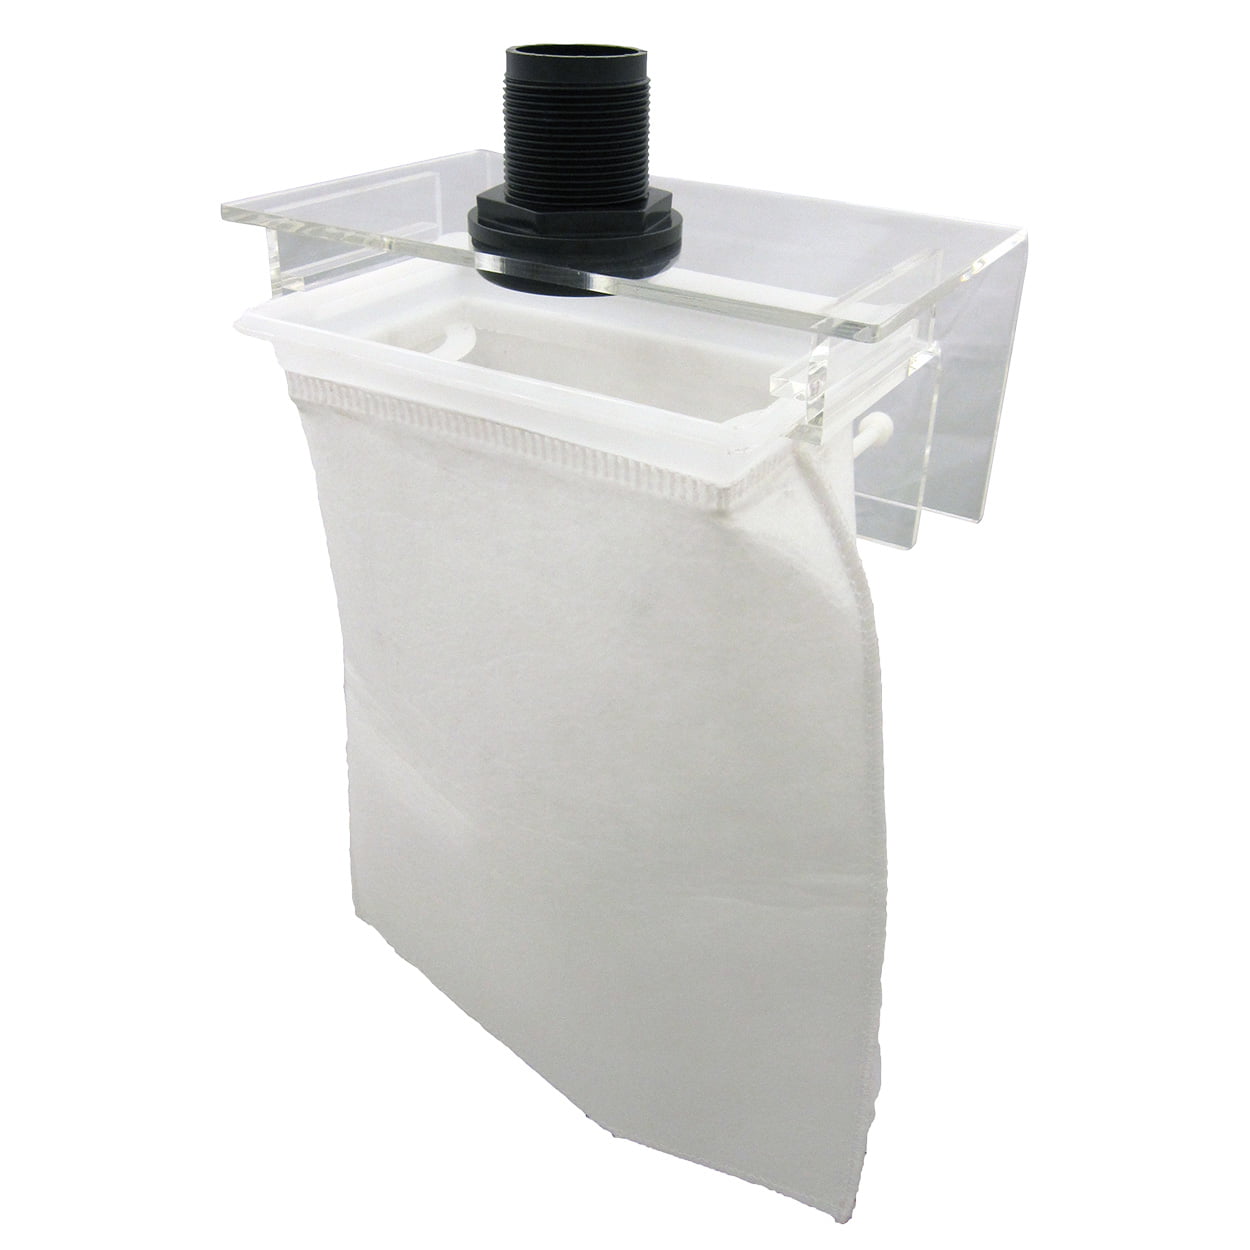 Qty-1 PAPER BAG HOLDER SANYO SC-S700P CANISTER 6630092620 